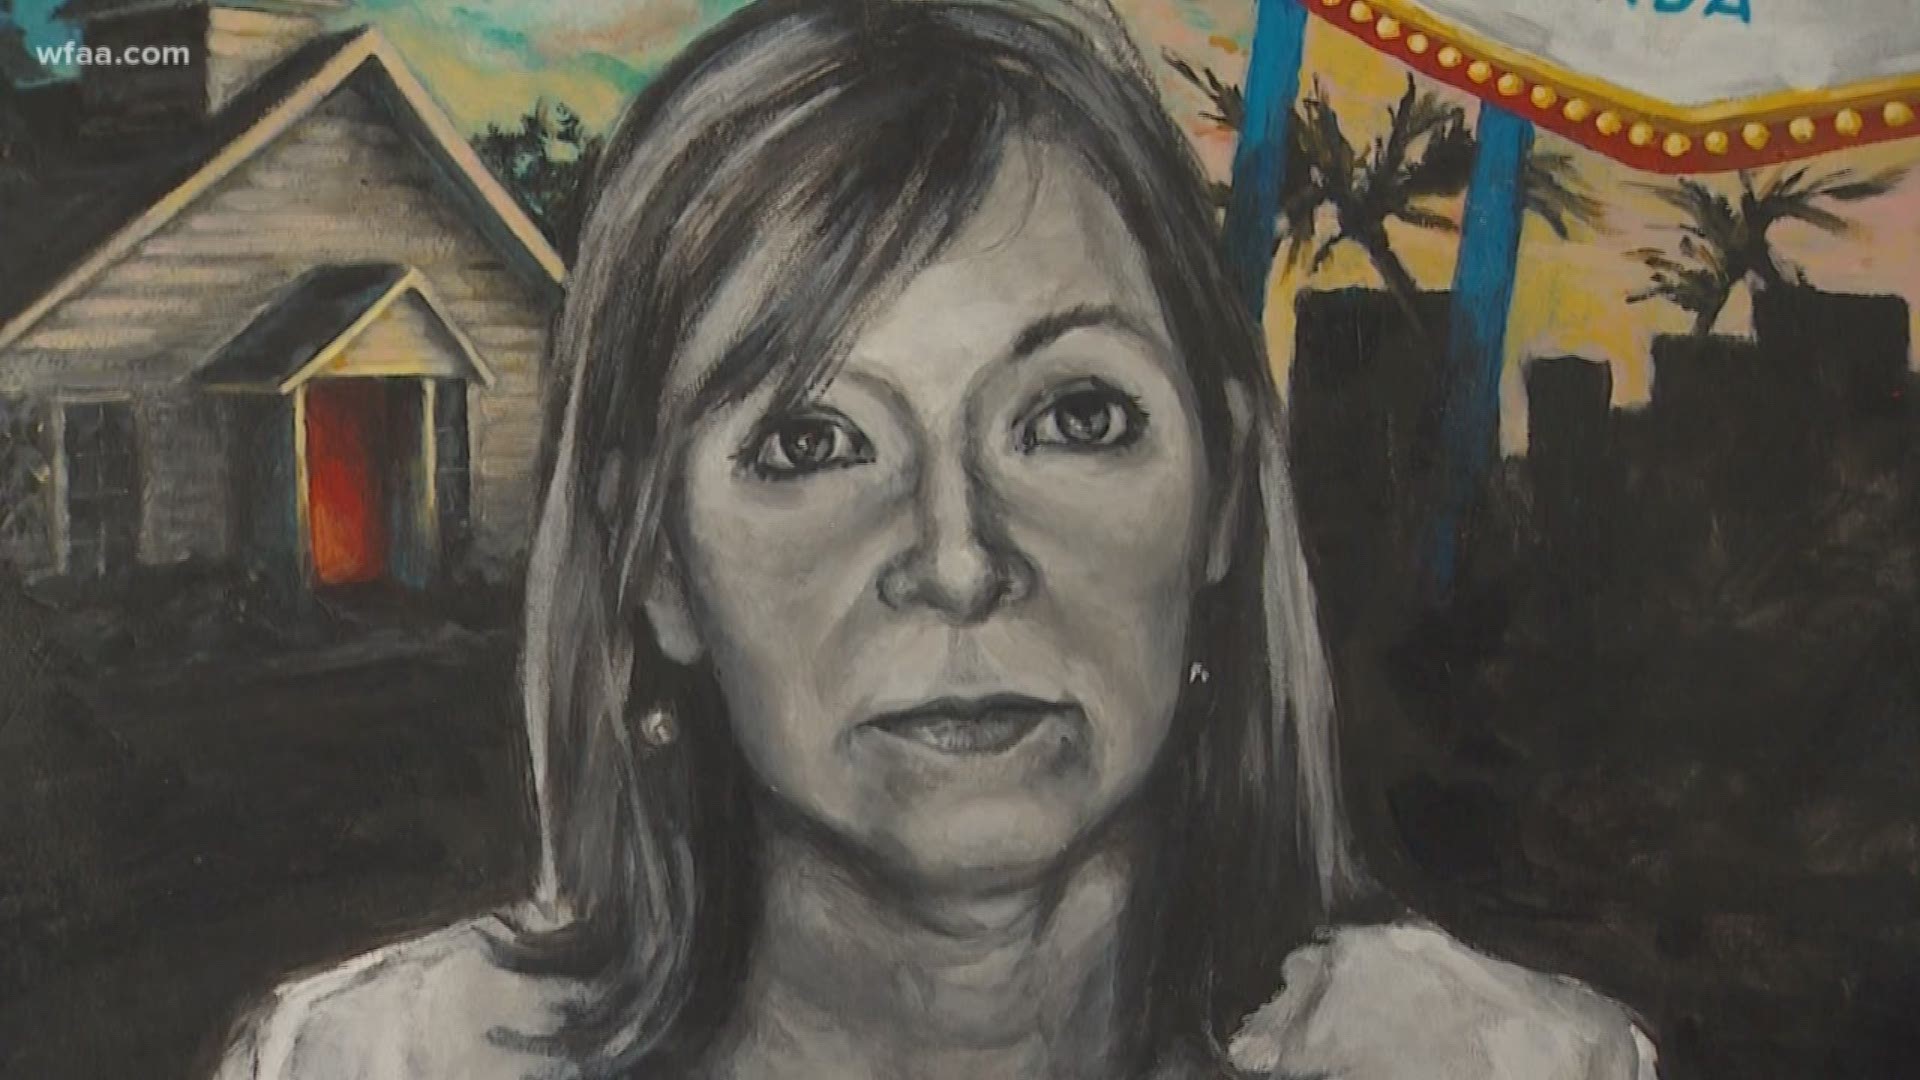 A Flower Mound woman found a way to honor shooting victims through painting.